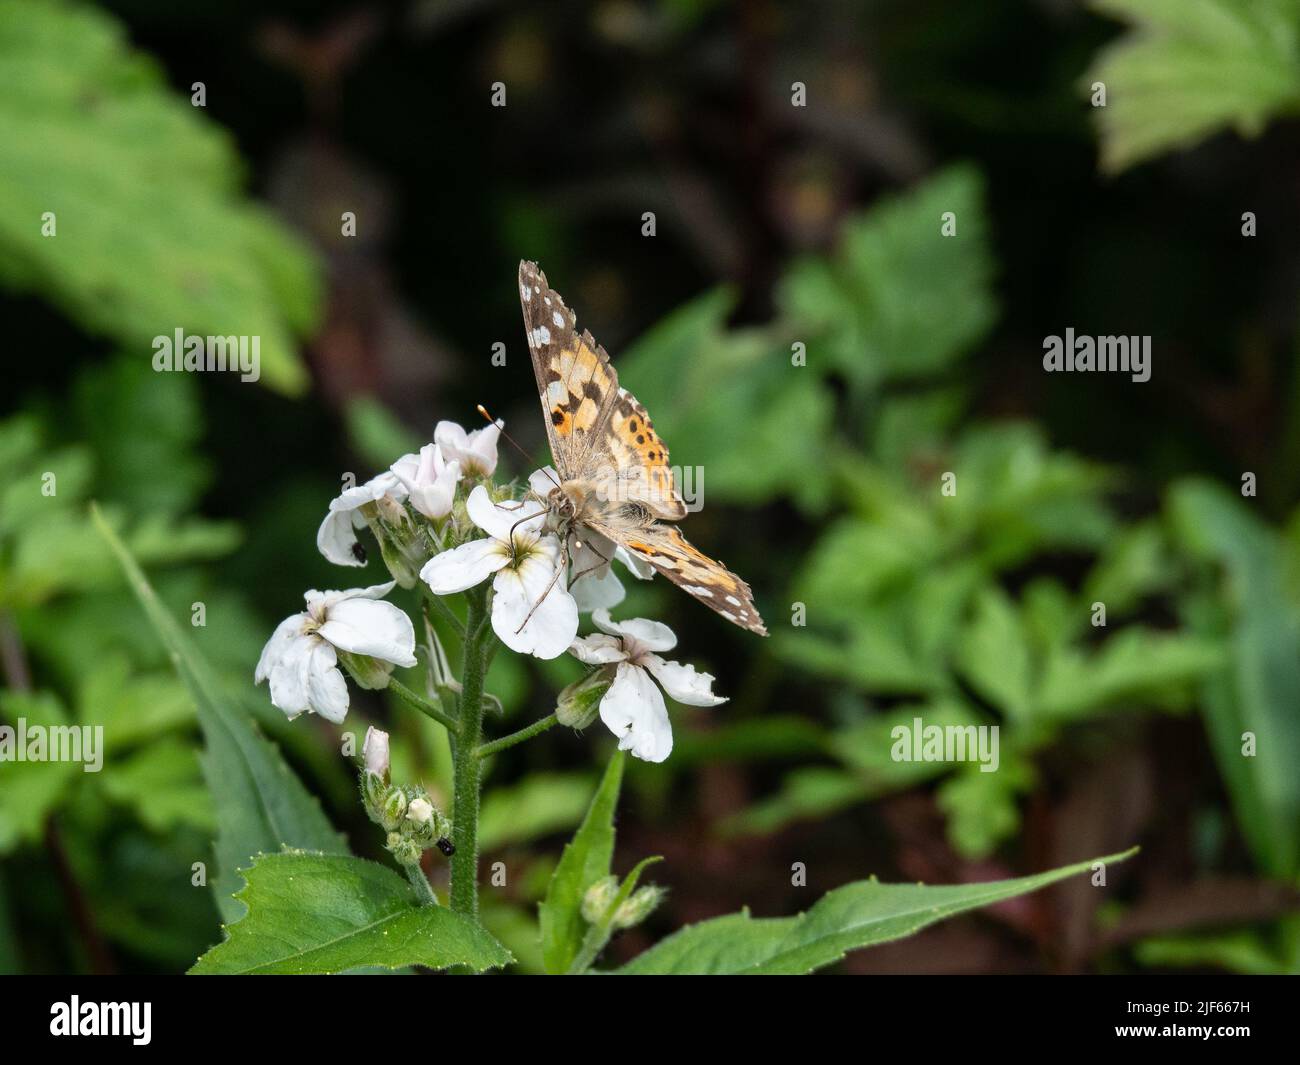 A painted lady (Vanessa cardui) buterfly feeding on a white Honesty flower Stock Photo